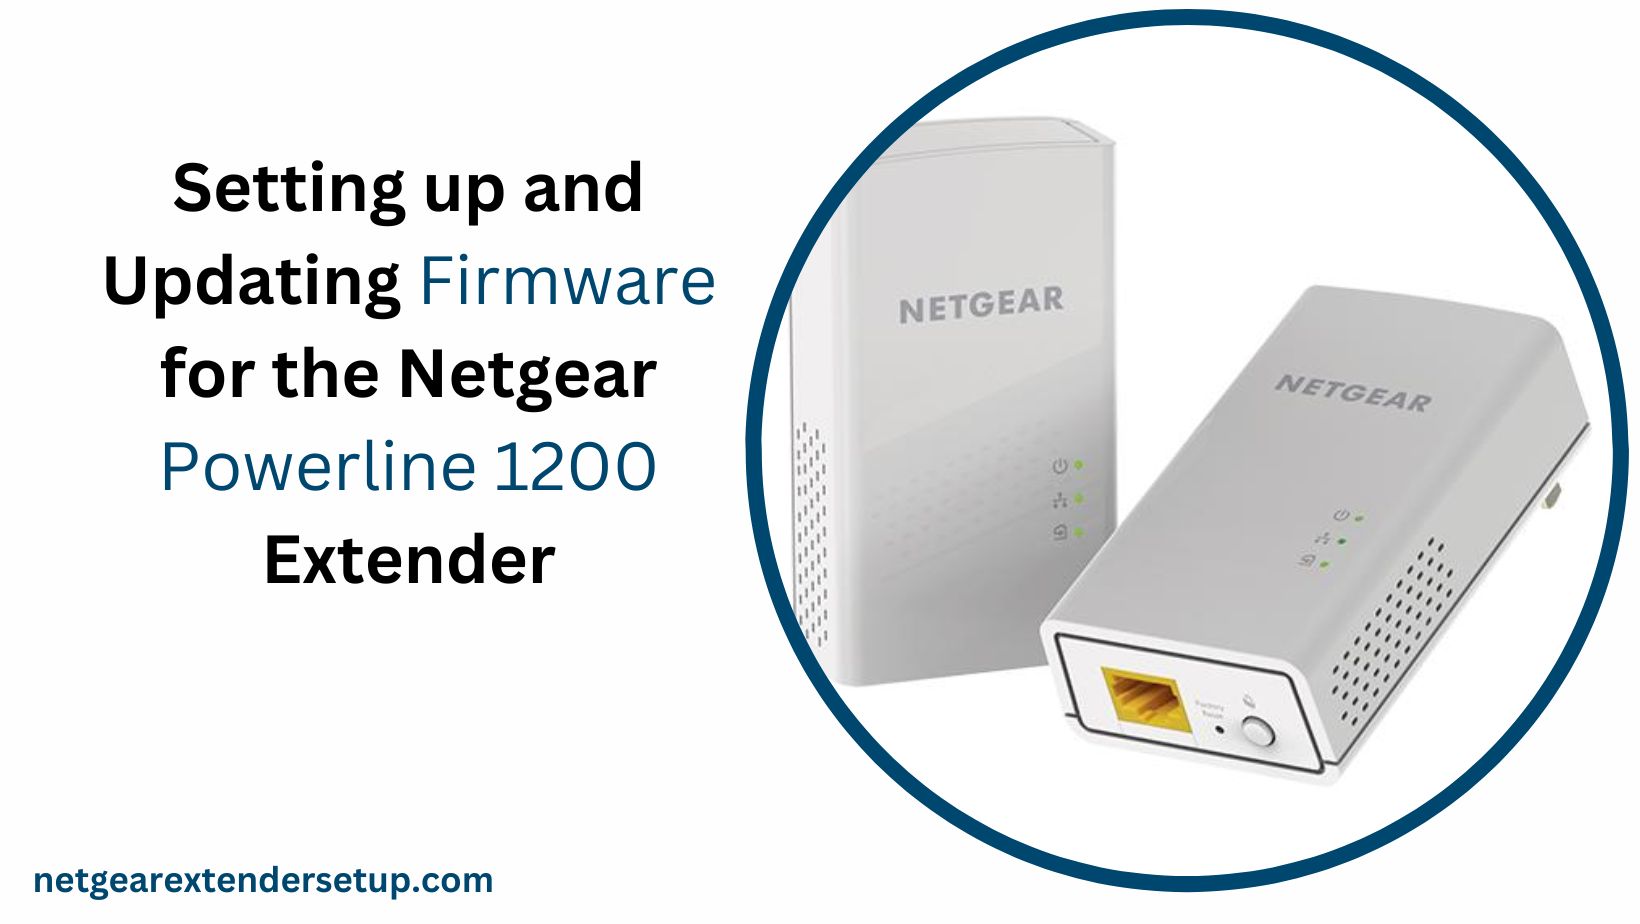 You are currently viewing Setting up and Updating Firmware for the Netgear Powerline 1200 Extender